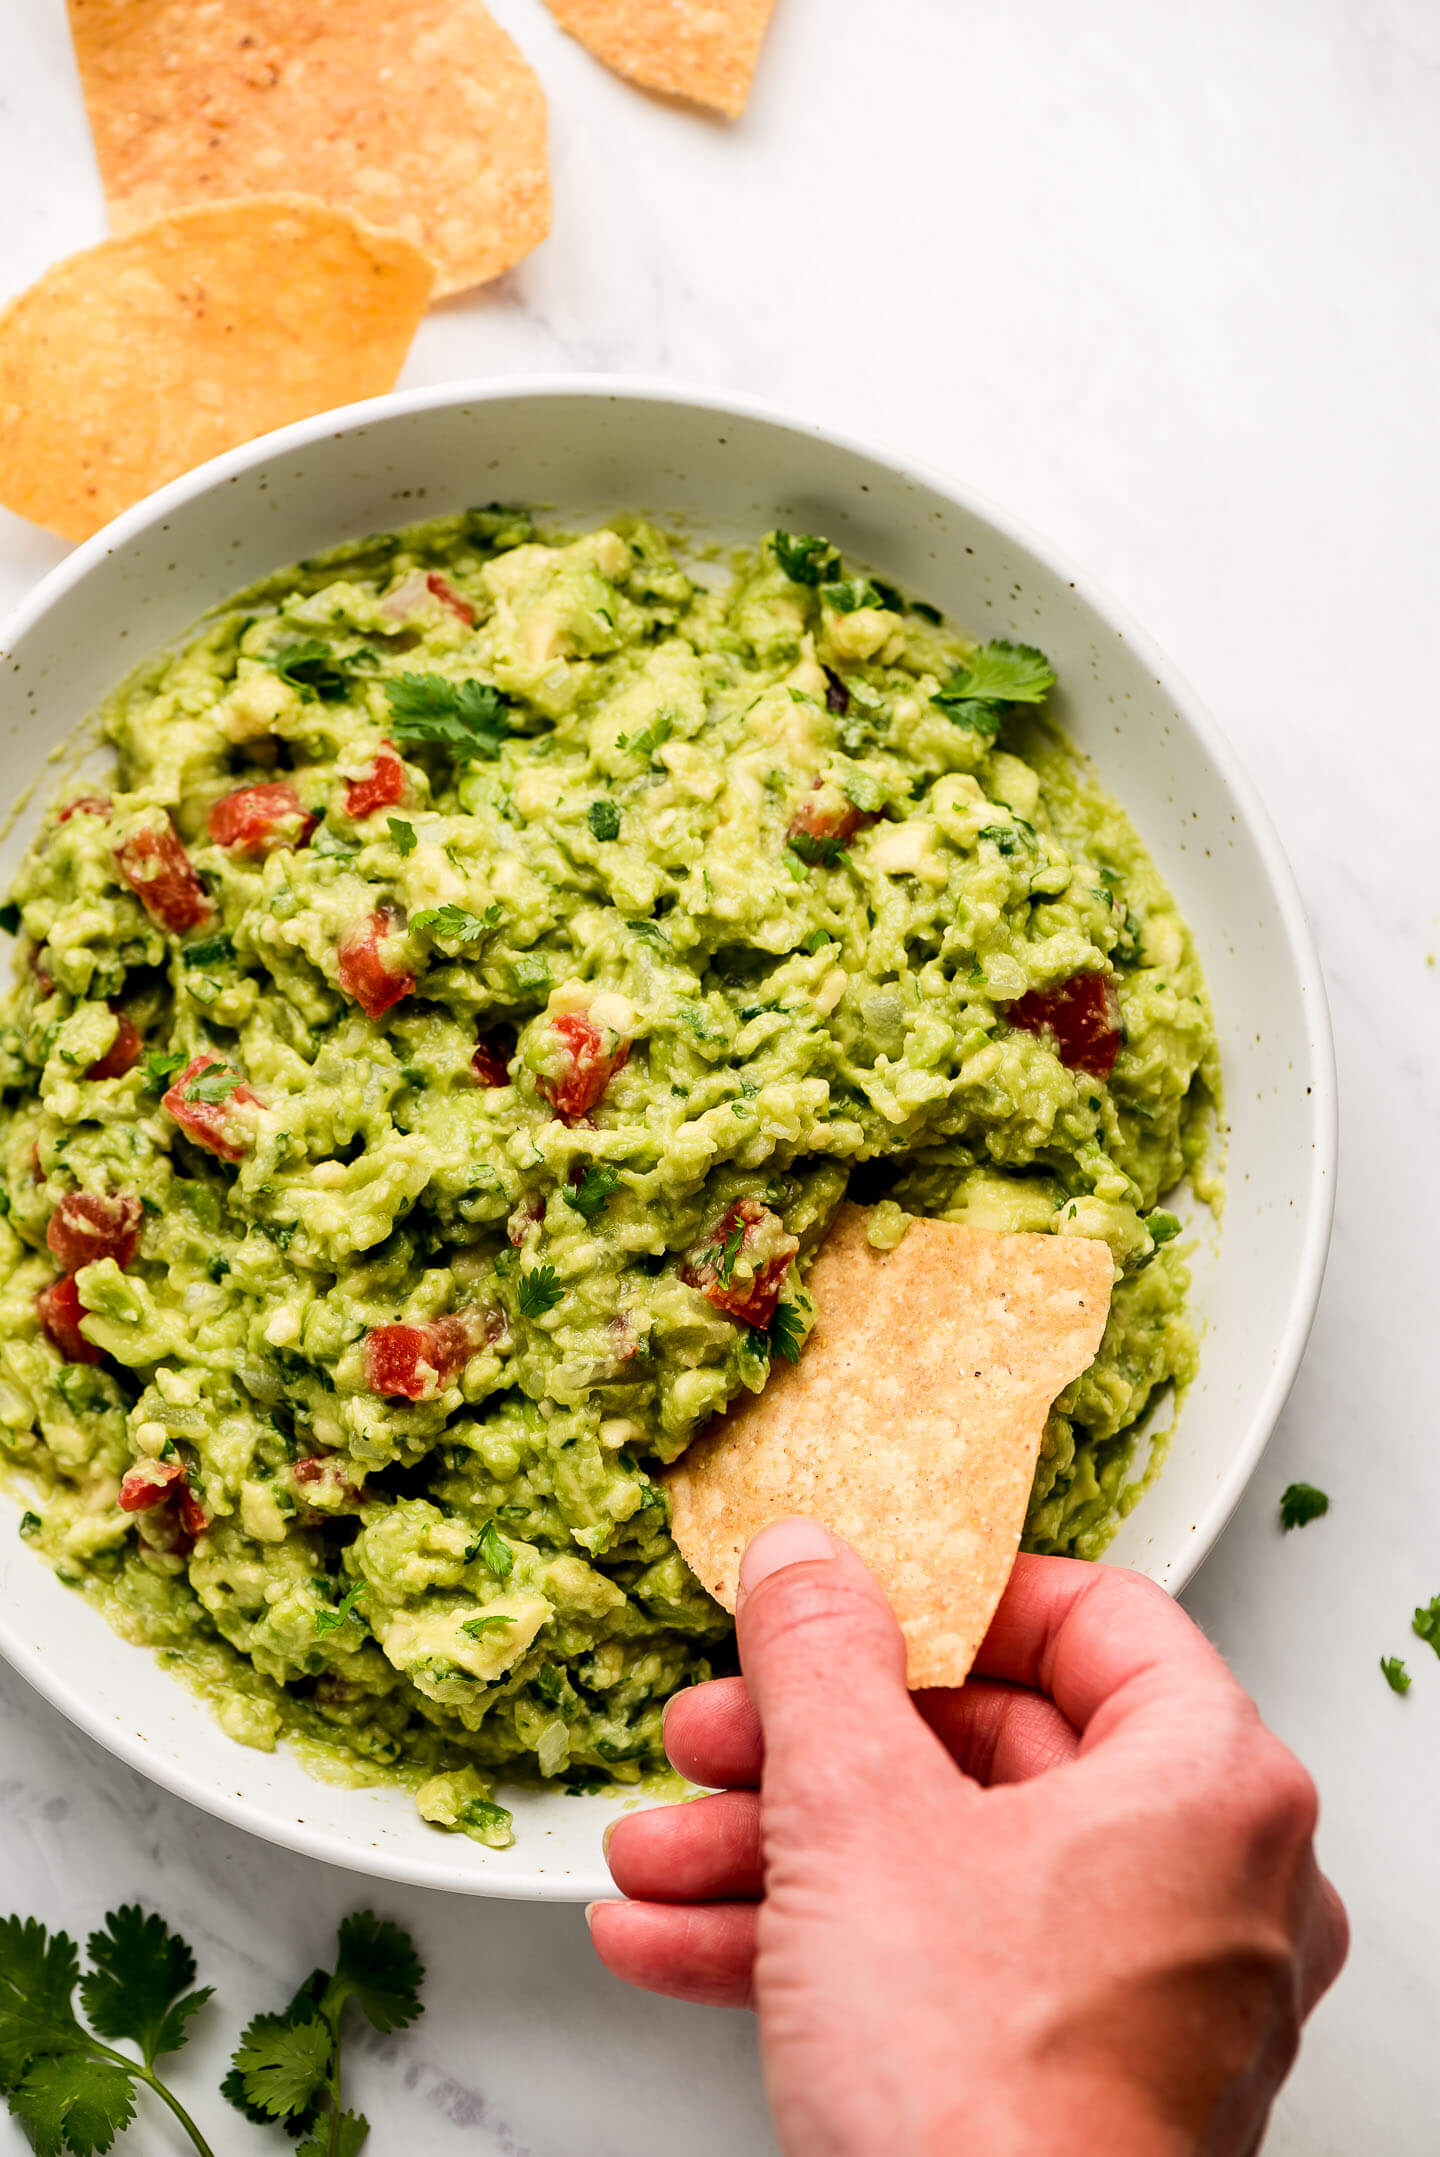 A hand dipping a chip in a large bowl of guacamole.